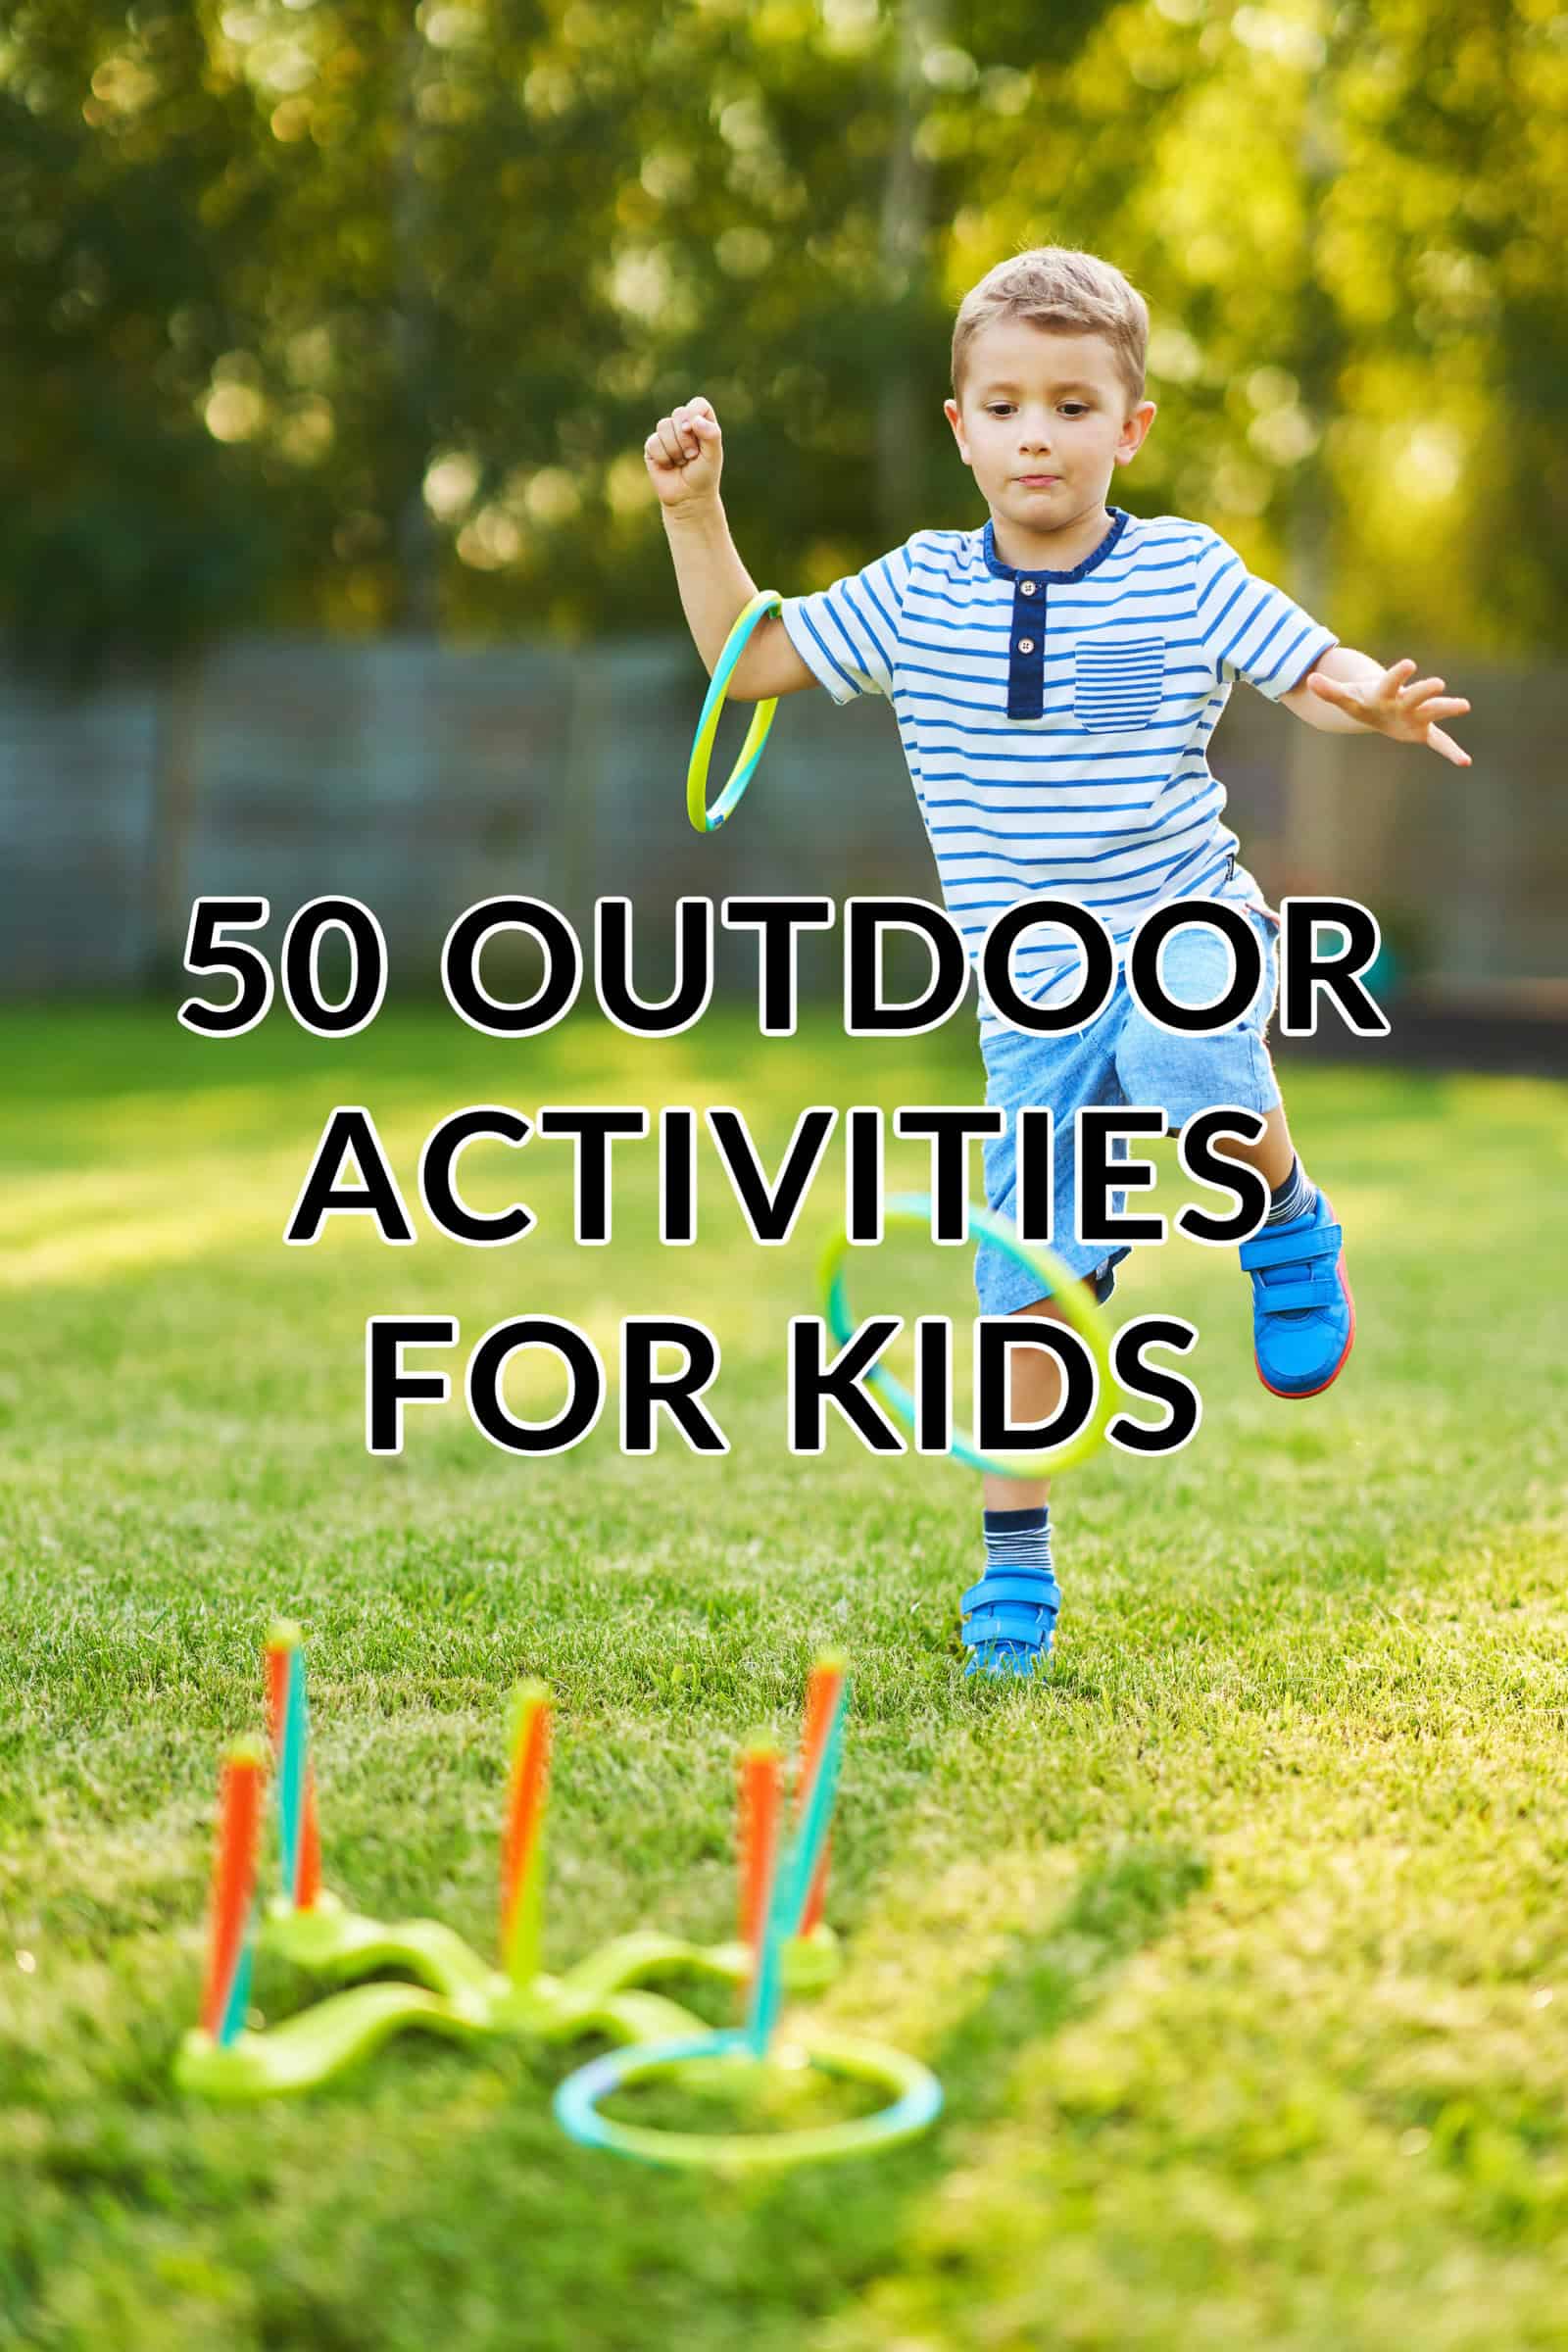 50 Outdoor Summer Activities For Kids At Home 